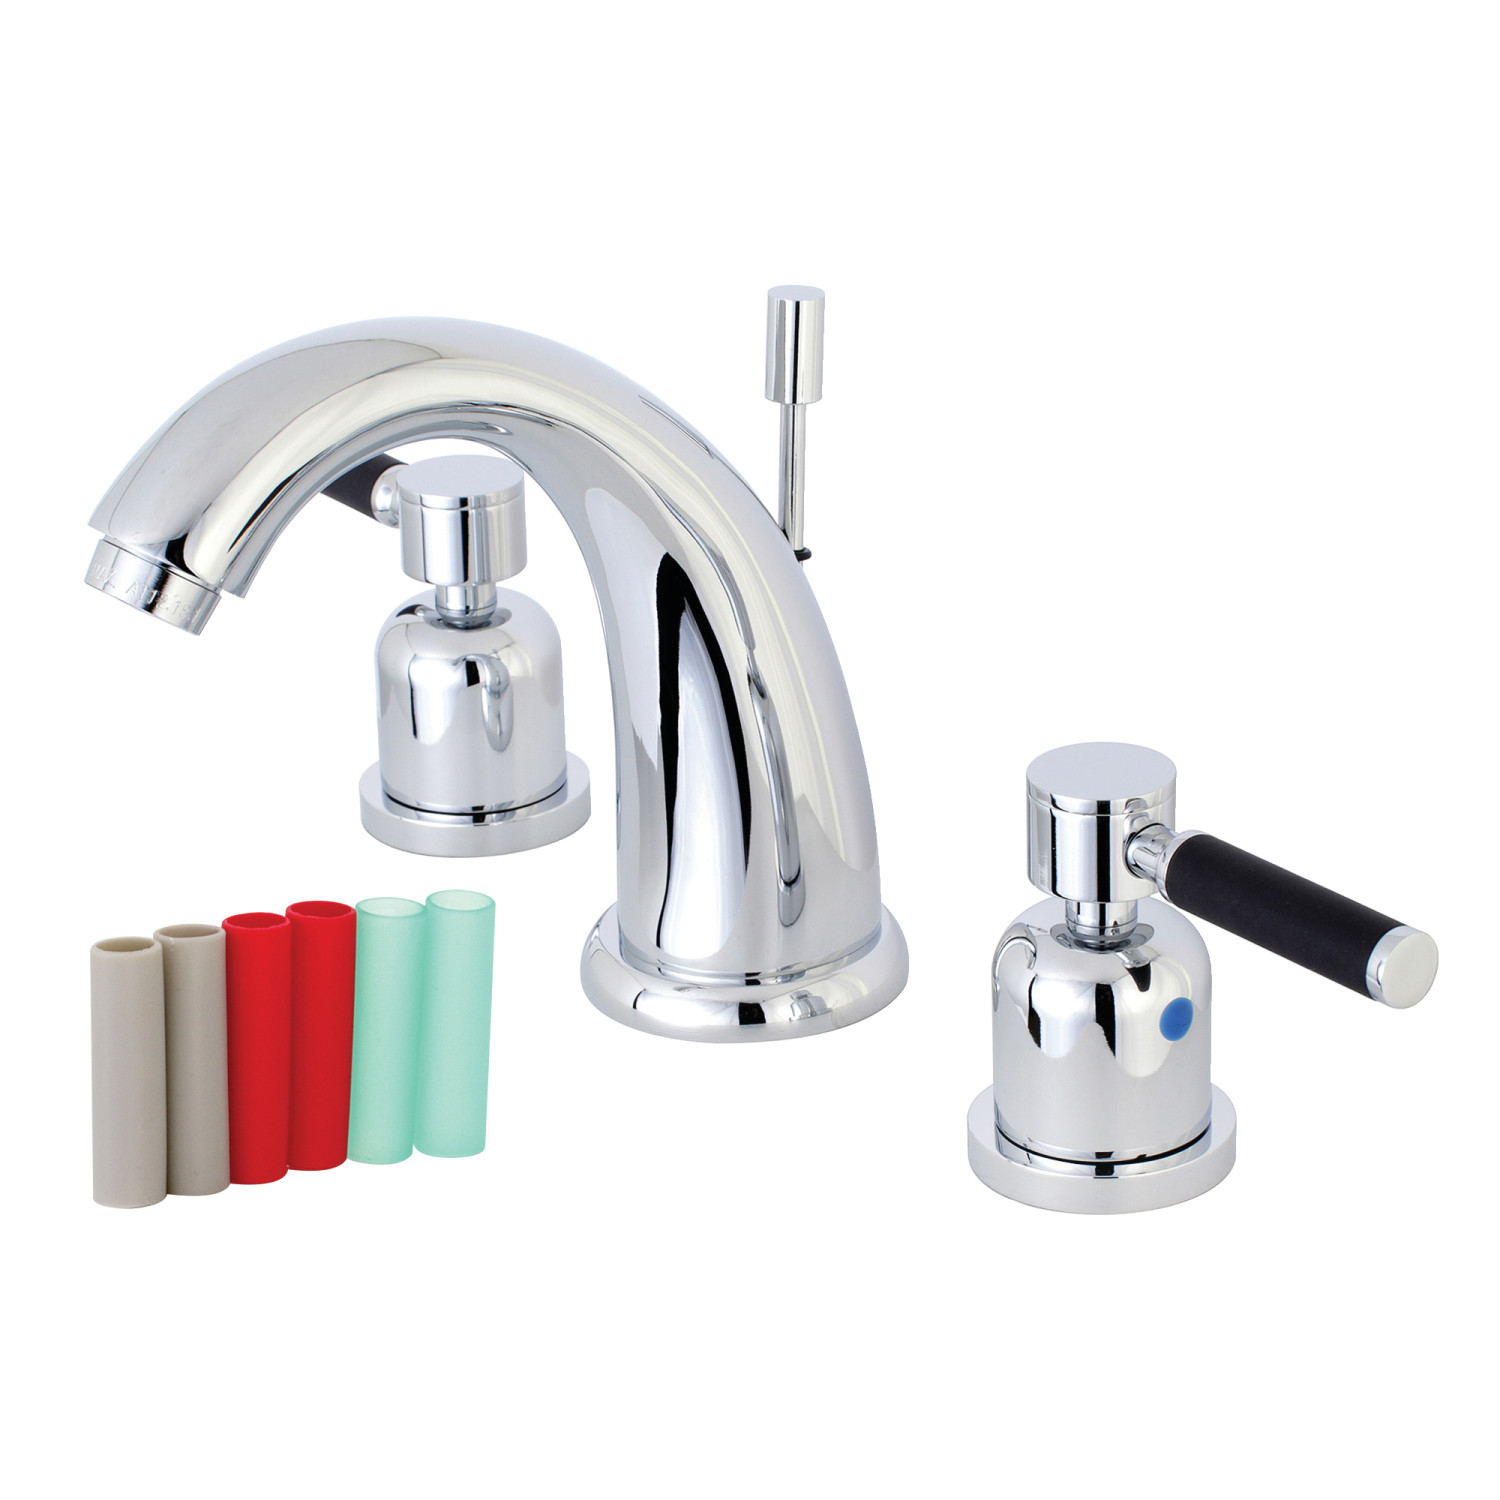 Modern Two-Handle 3-Hole Deck Mounted Widespread Bathroom Faucet with Plastic Pop-Up in Polished Chrome Finish